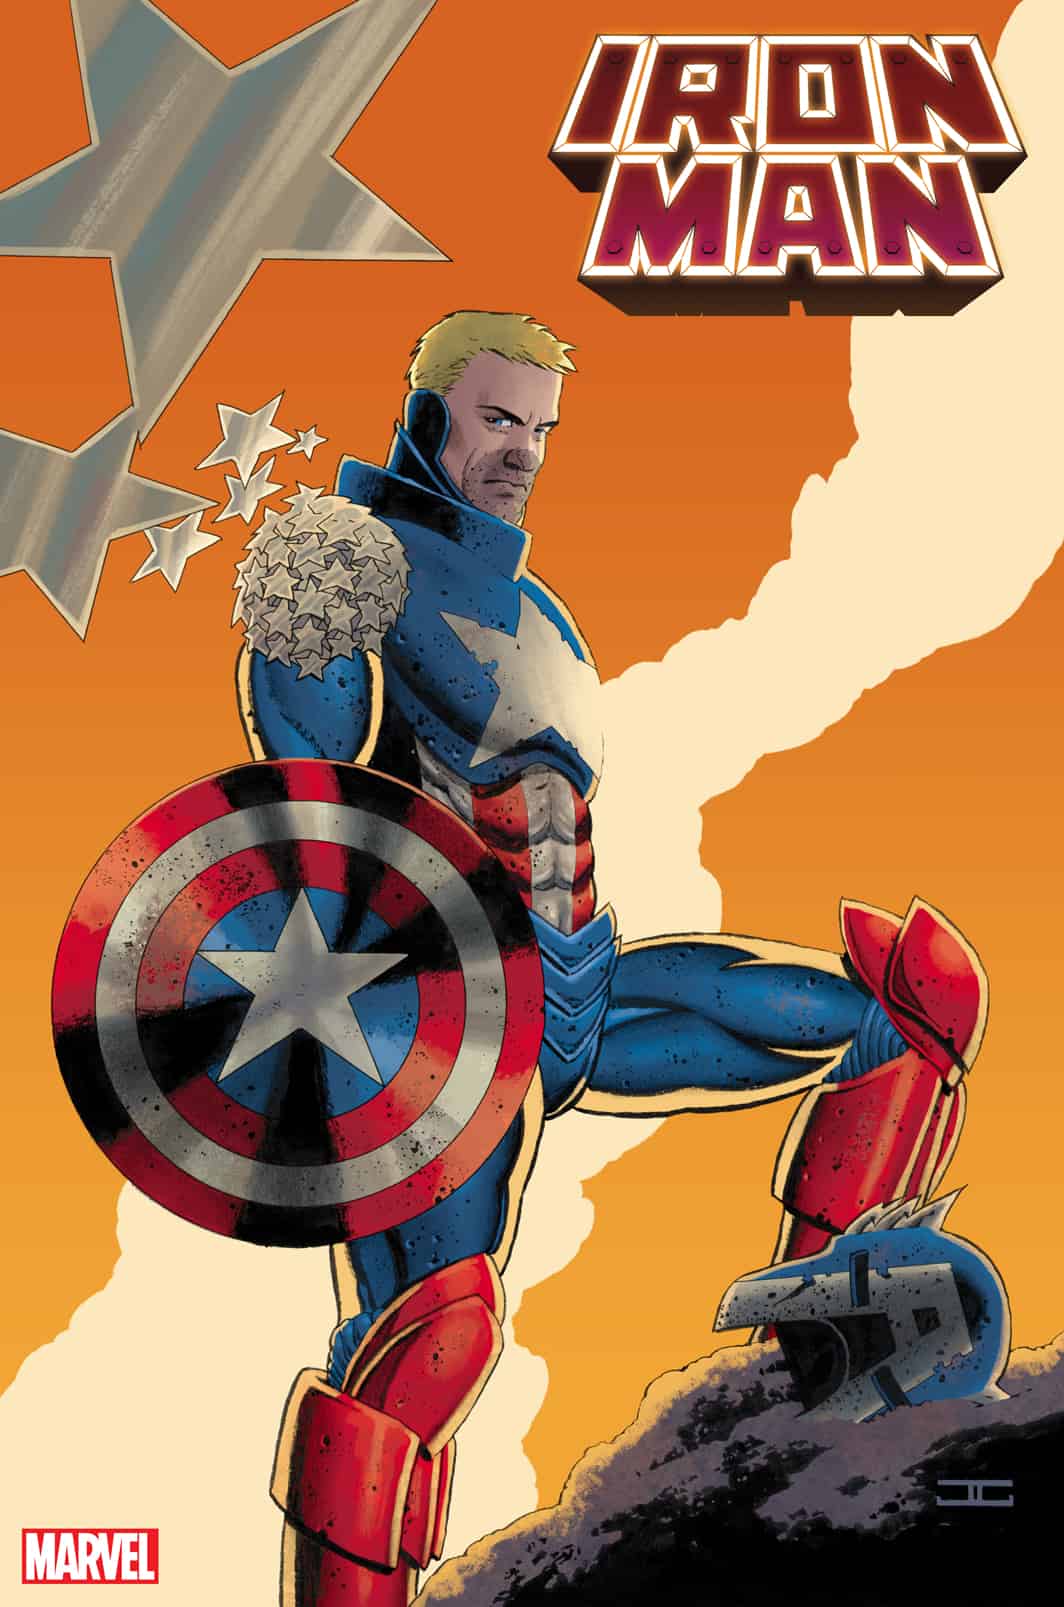 NEWS WATCH: MARVEL HEROES PAY HOMAGE TO CAPTAIN AMERICA IN 